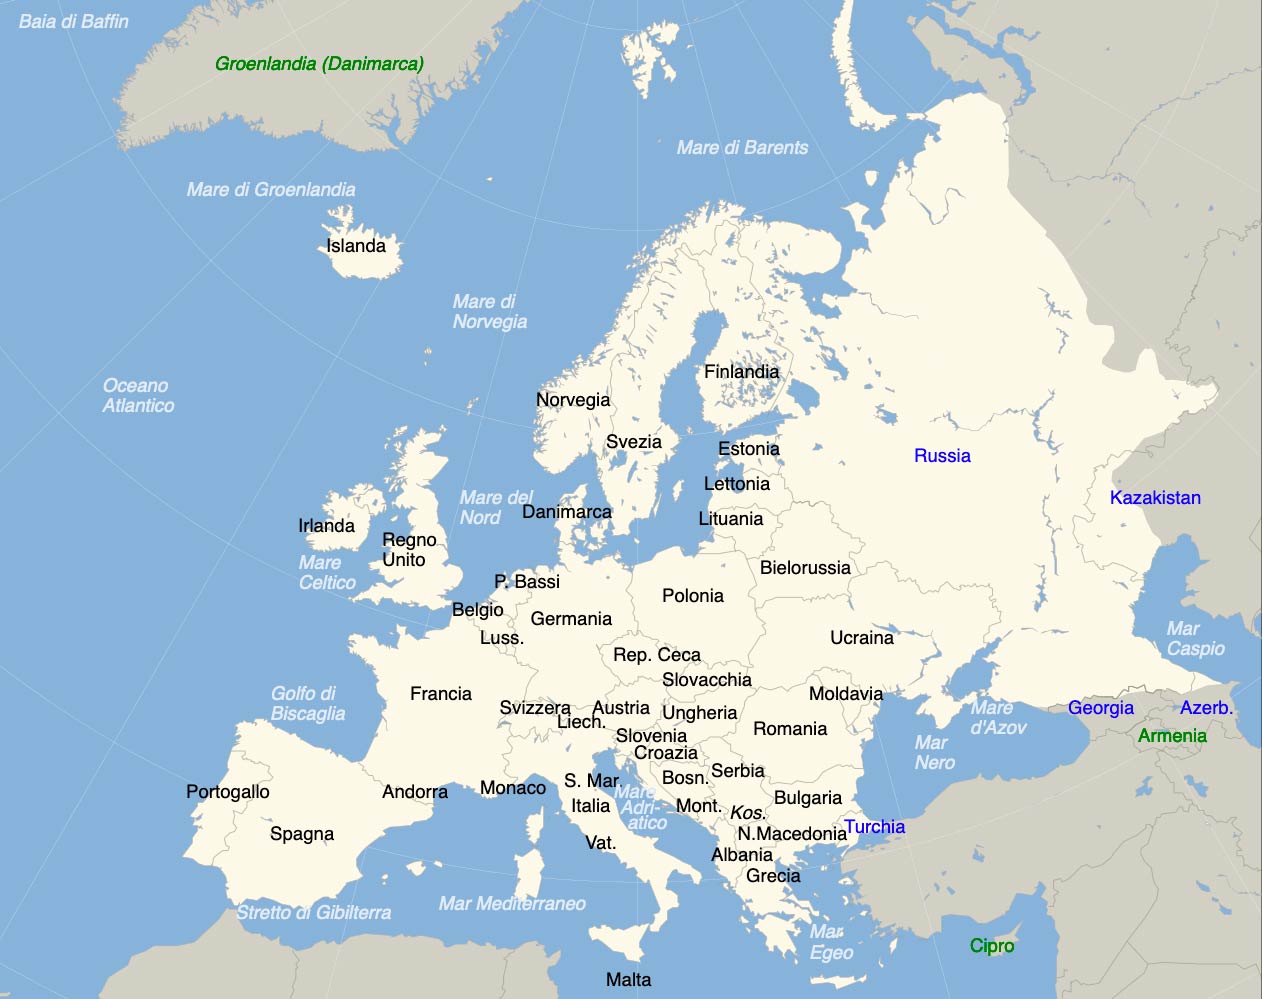 Map of Europe with country names in Italian